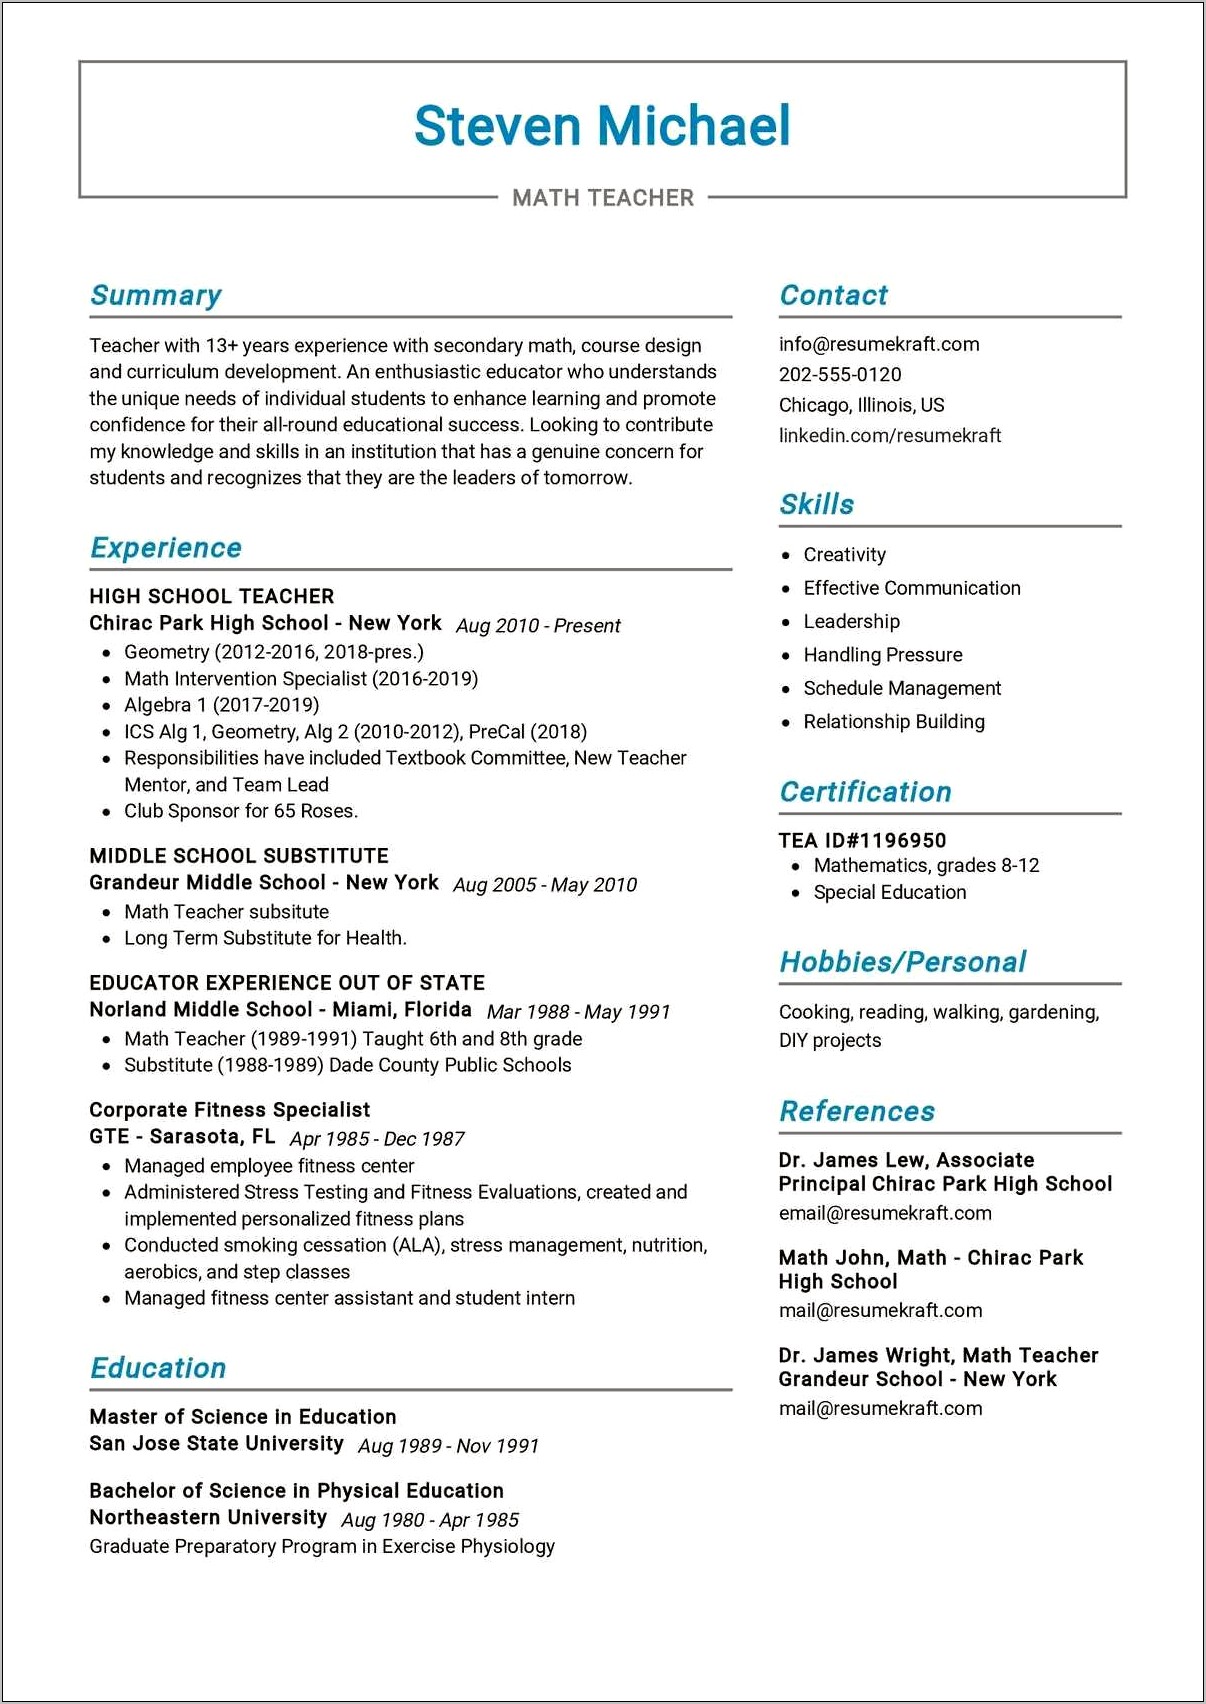 Sample Resume For Mathematics Teachers In The Philippines